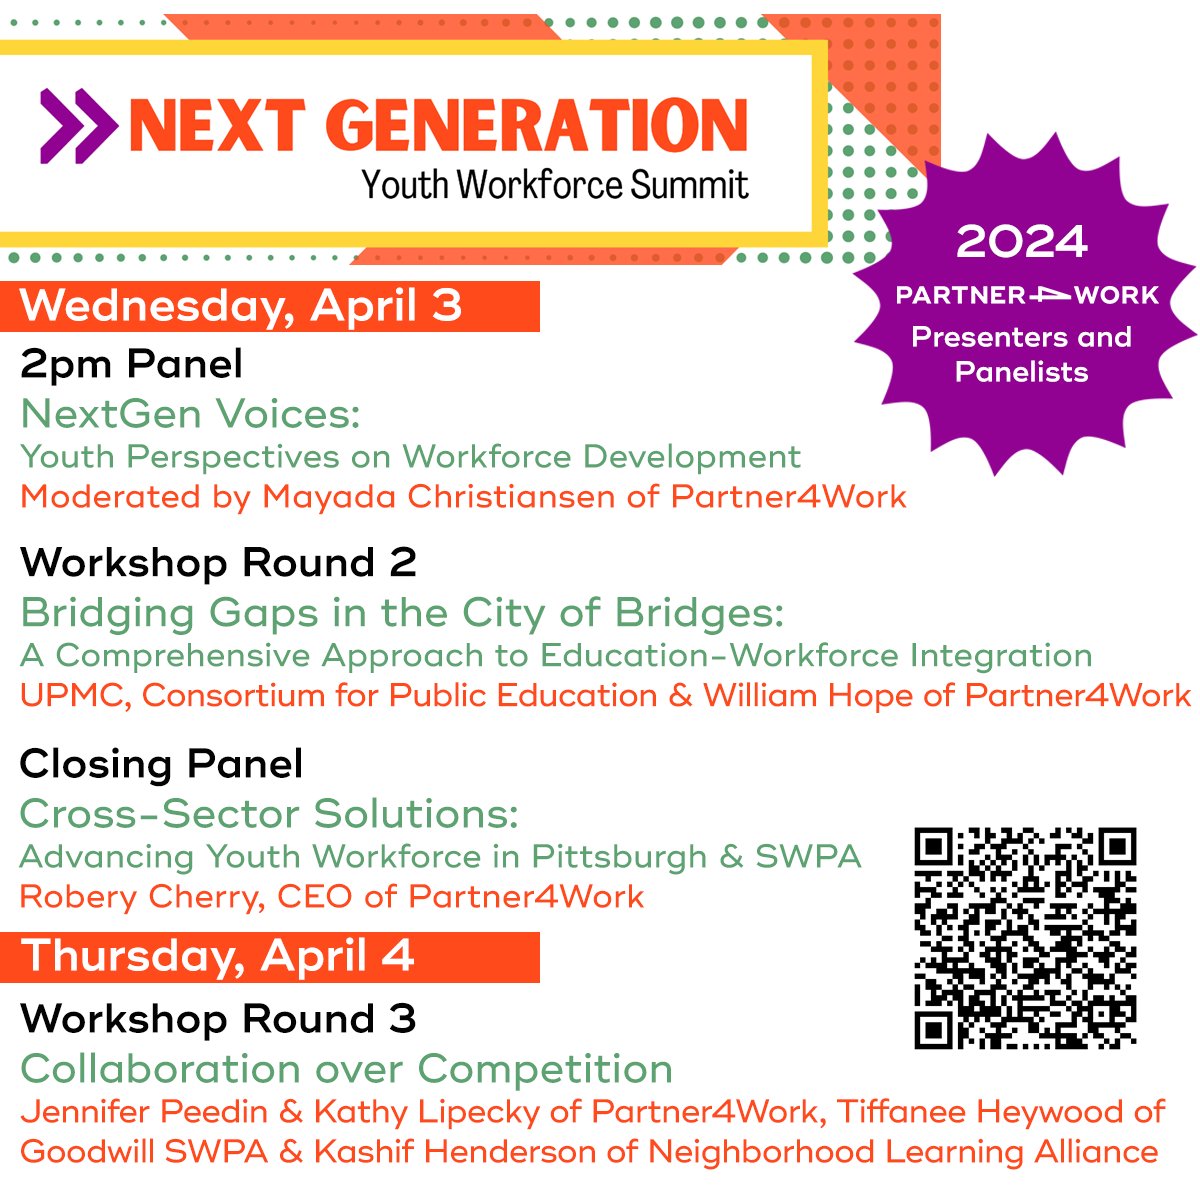 Pennsylvania Workforce Development Association's Next Generation Youth Workforce Summit starts tomorrow! Don't miss our presenters and Panelists at the Community College of Allegheny County.